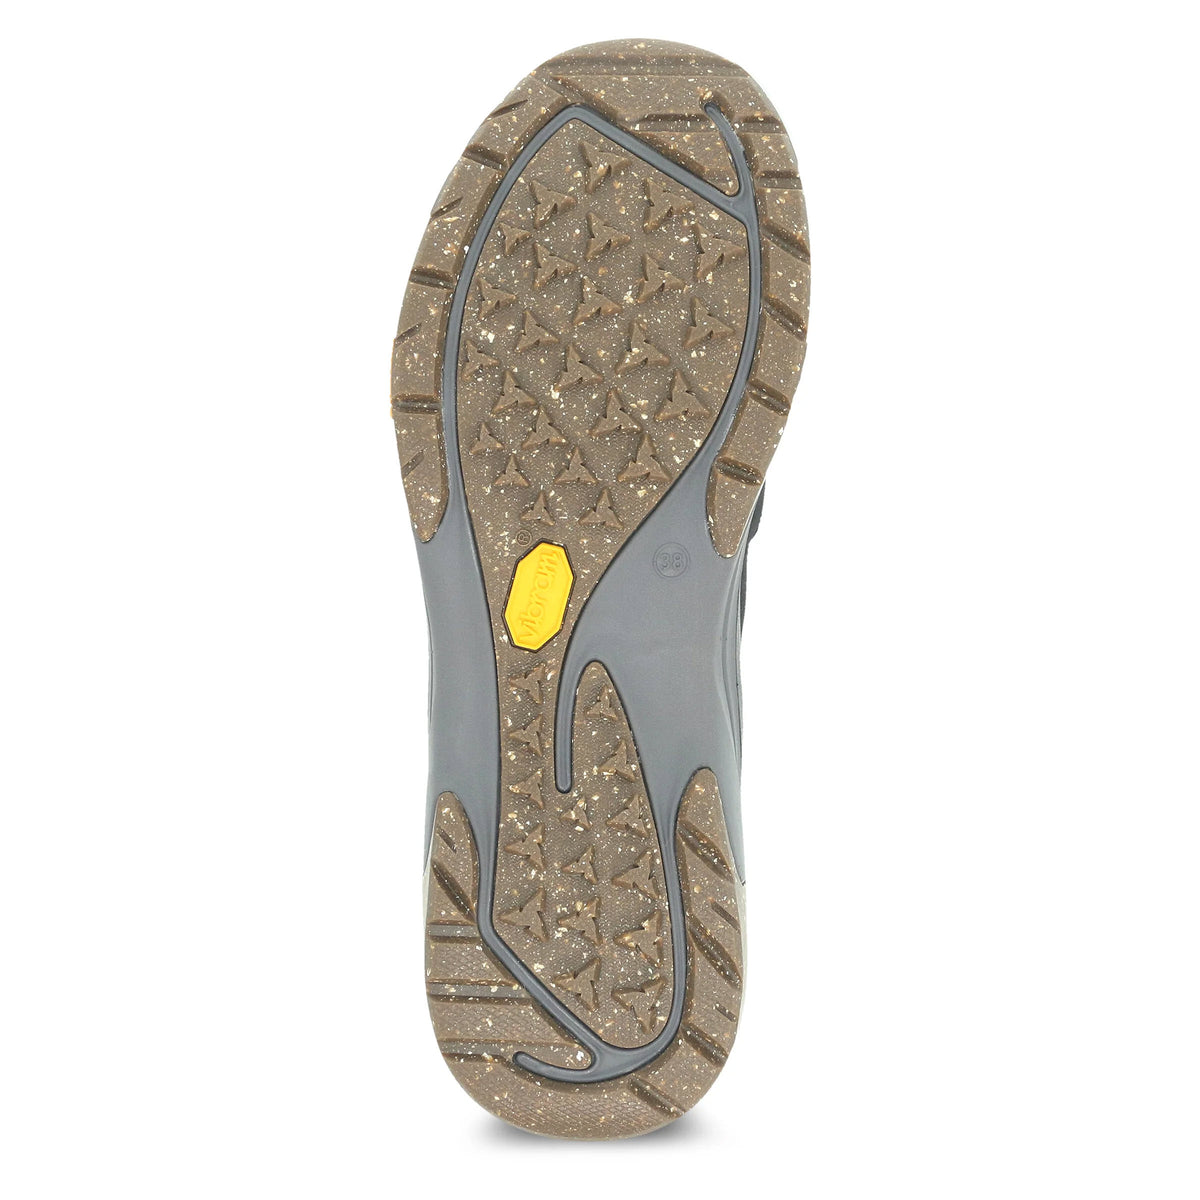 Bottom view of a Dansko Mia Black - Womens shoe featuring the textured Vibram ECOSTEP EVO rubber outsole with gray and brown segments and a small yellow logo.